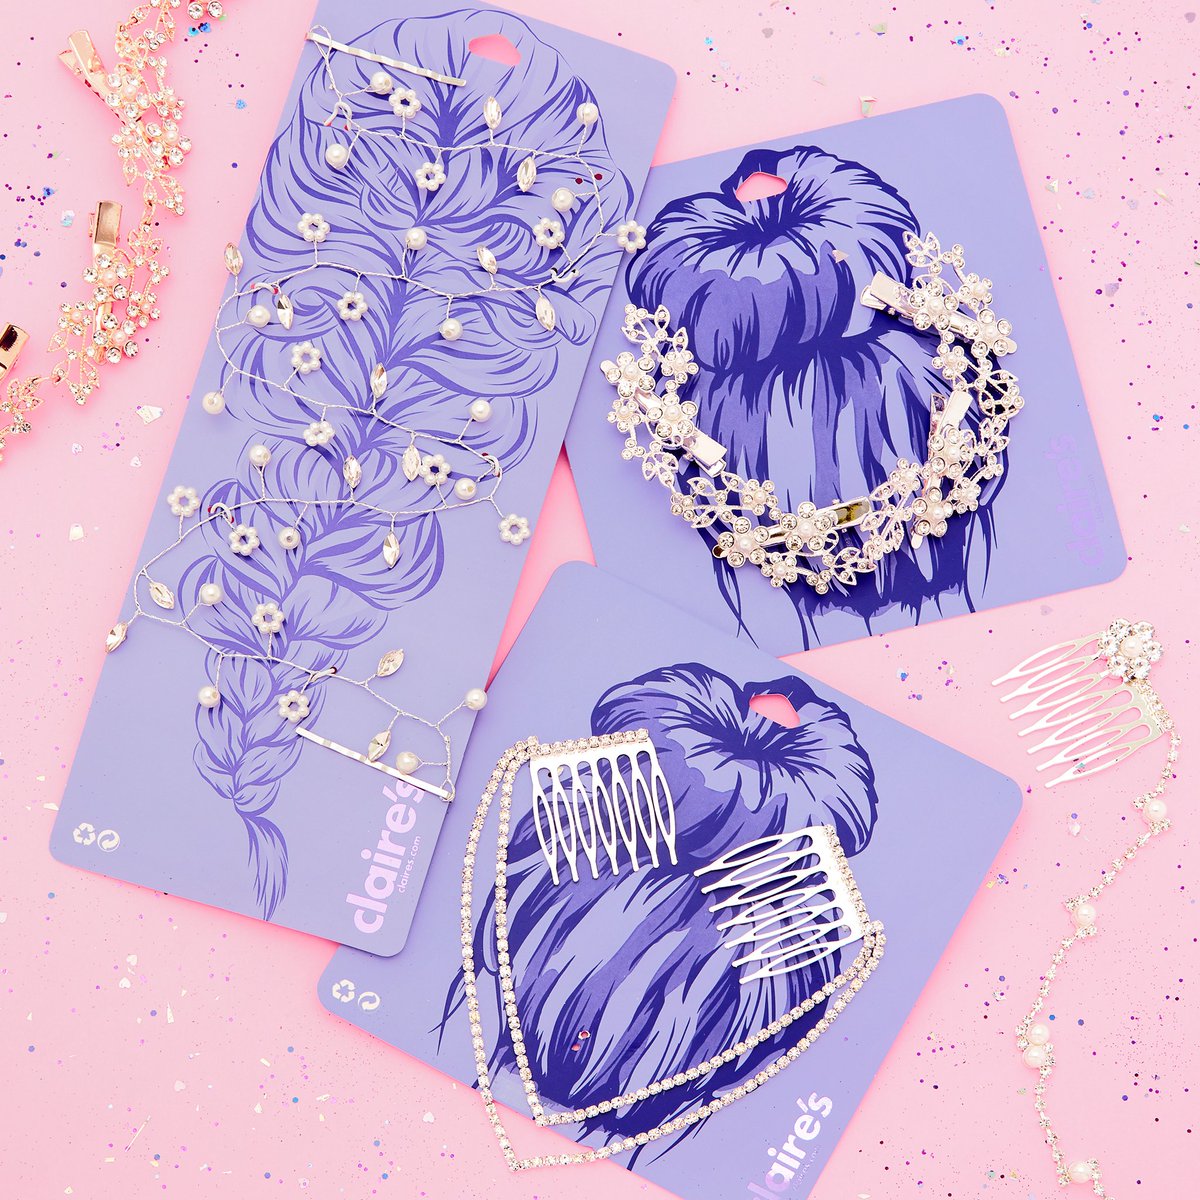 Soldat patologisk koncert Claire's on X: "Create a gorgeous hairstyle from prom with our range of hair  accessories like vines and swags! 💁🏼 Shop in store and online!  #ItsAtClaires https://t.co/bvR3VOOIgn" / X